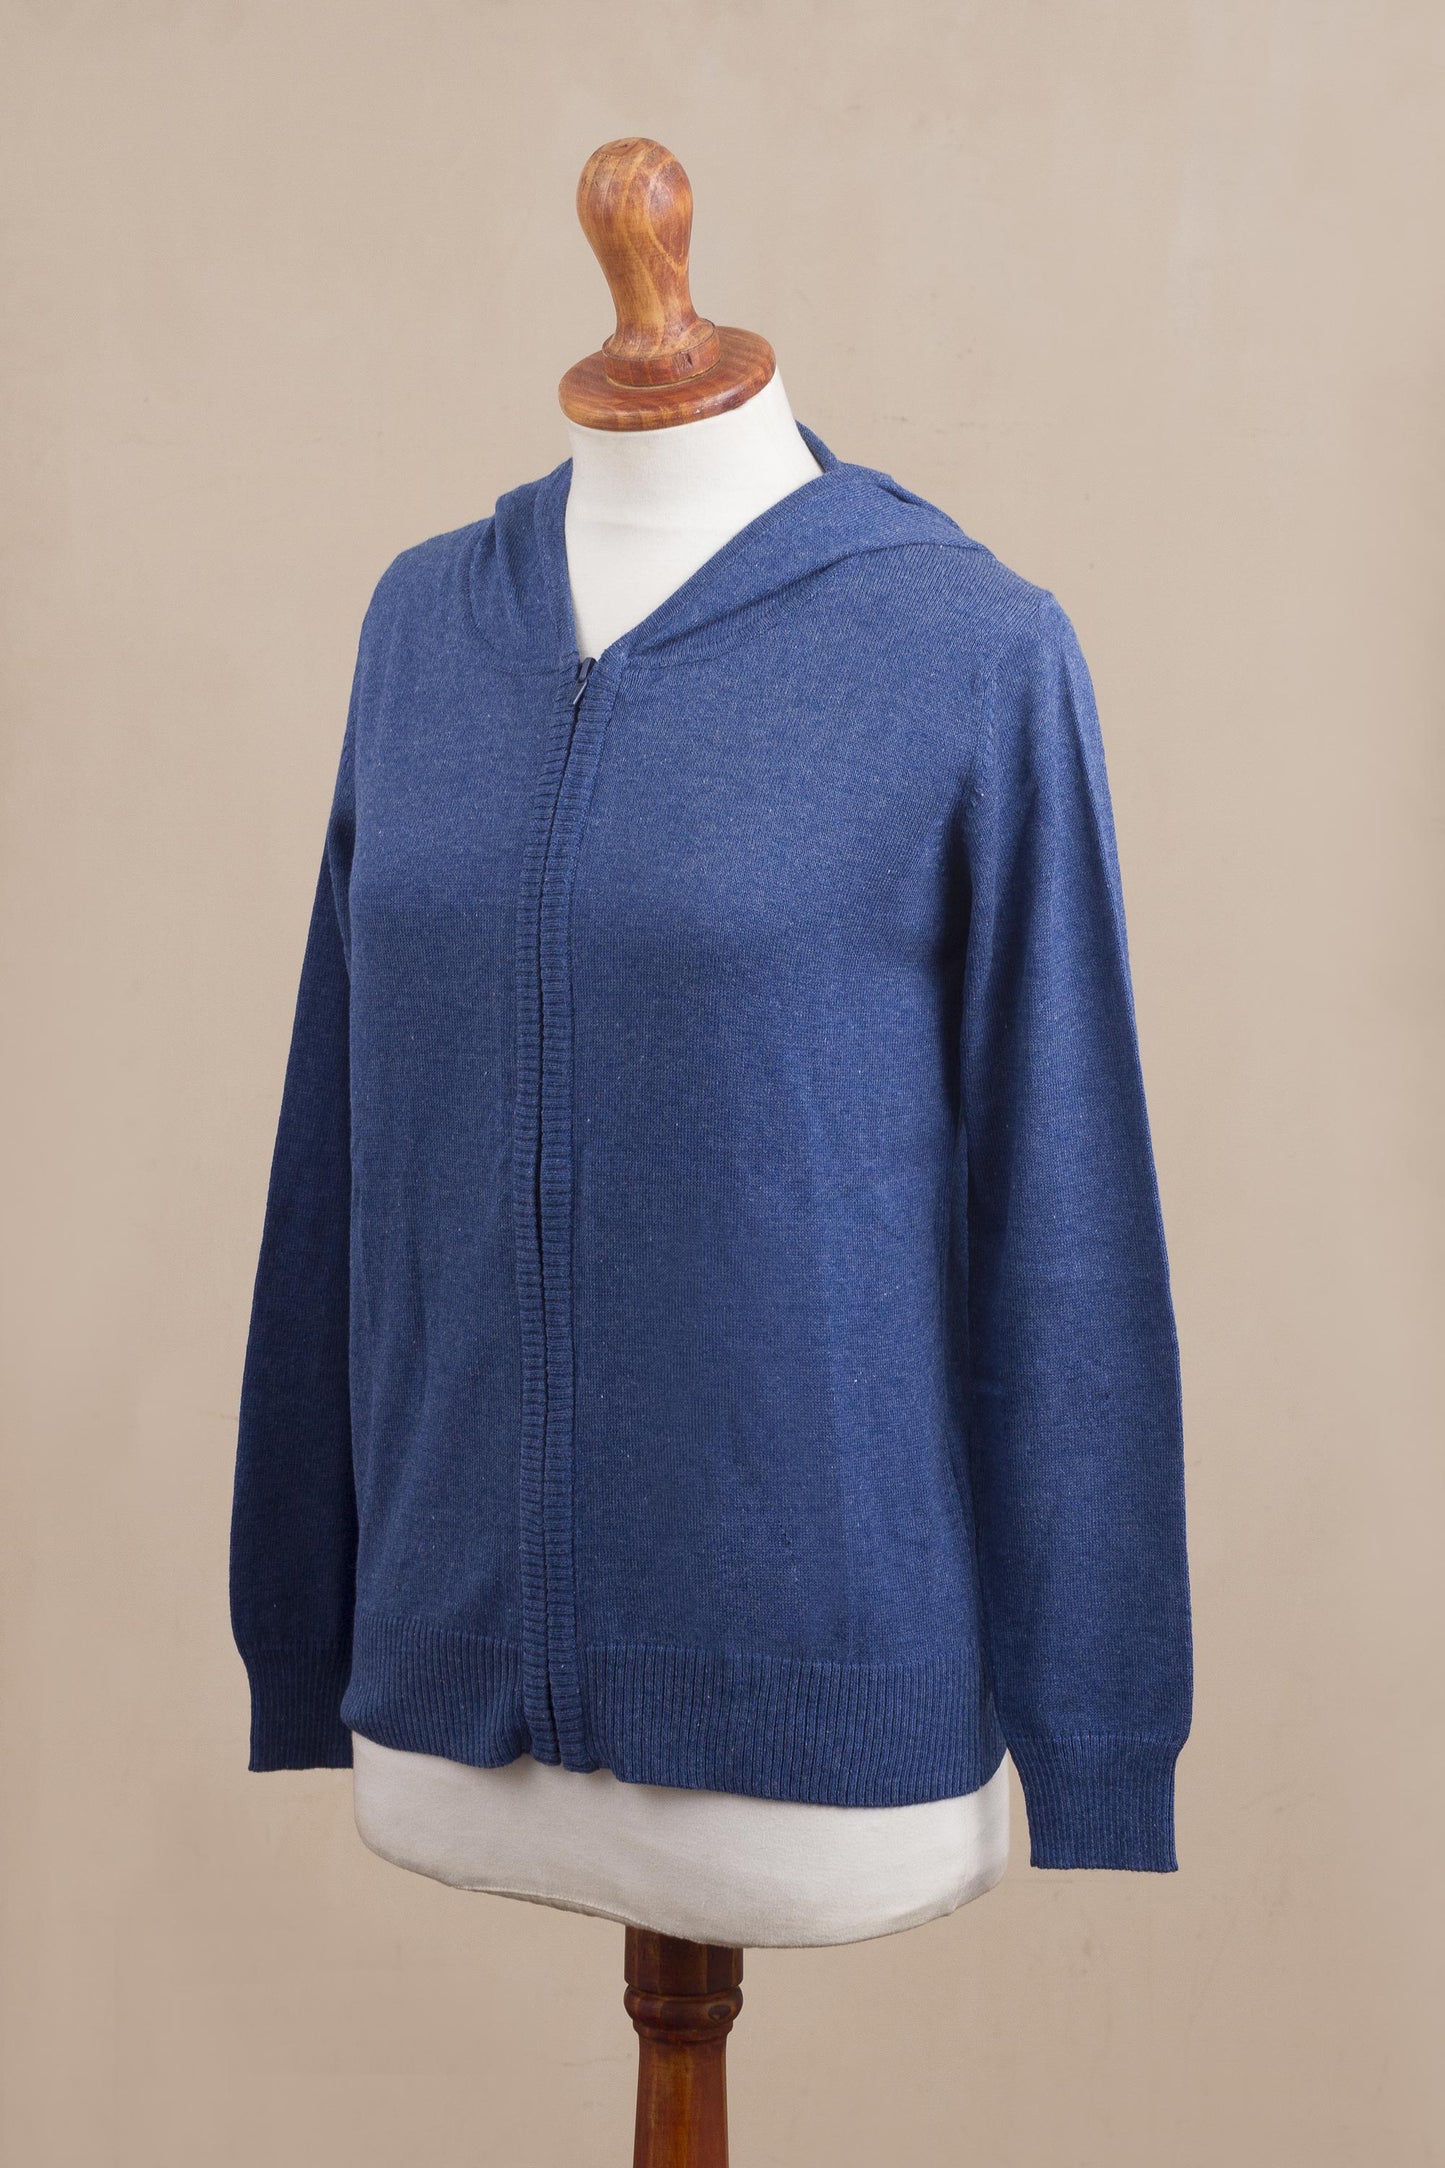 Simple Delight in Royal Blue Cotton Blend Hoodie in Royal Blue from Peru